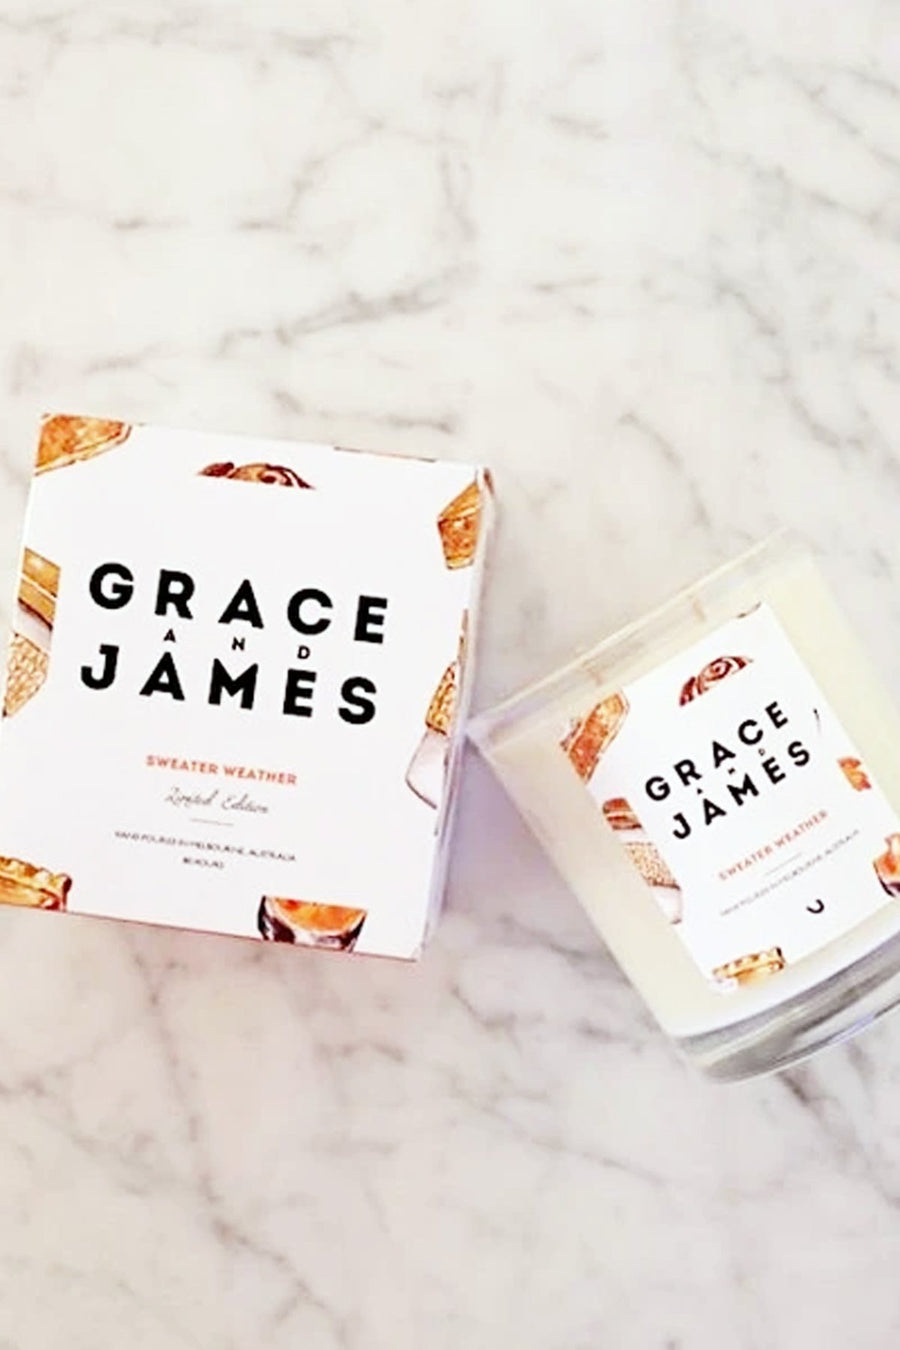 Sweater Weather - Autumn/Winter Limited Edition Candle